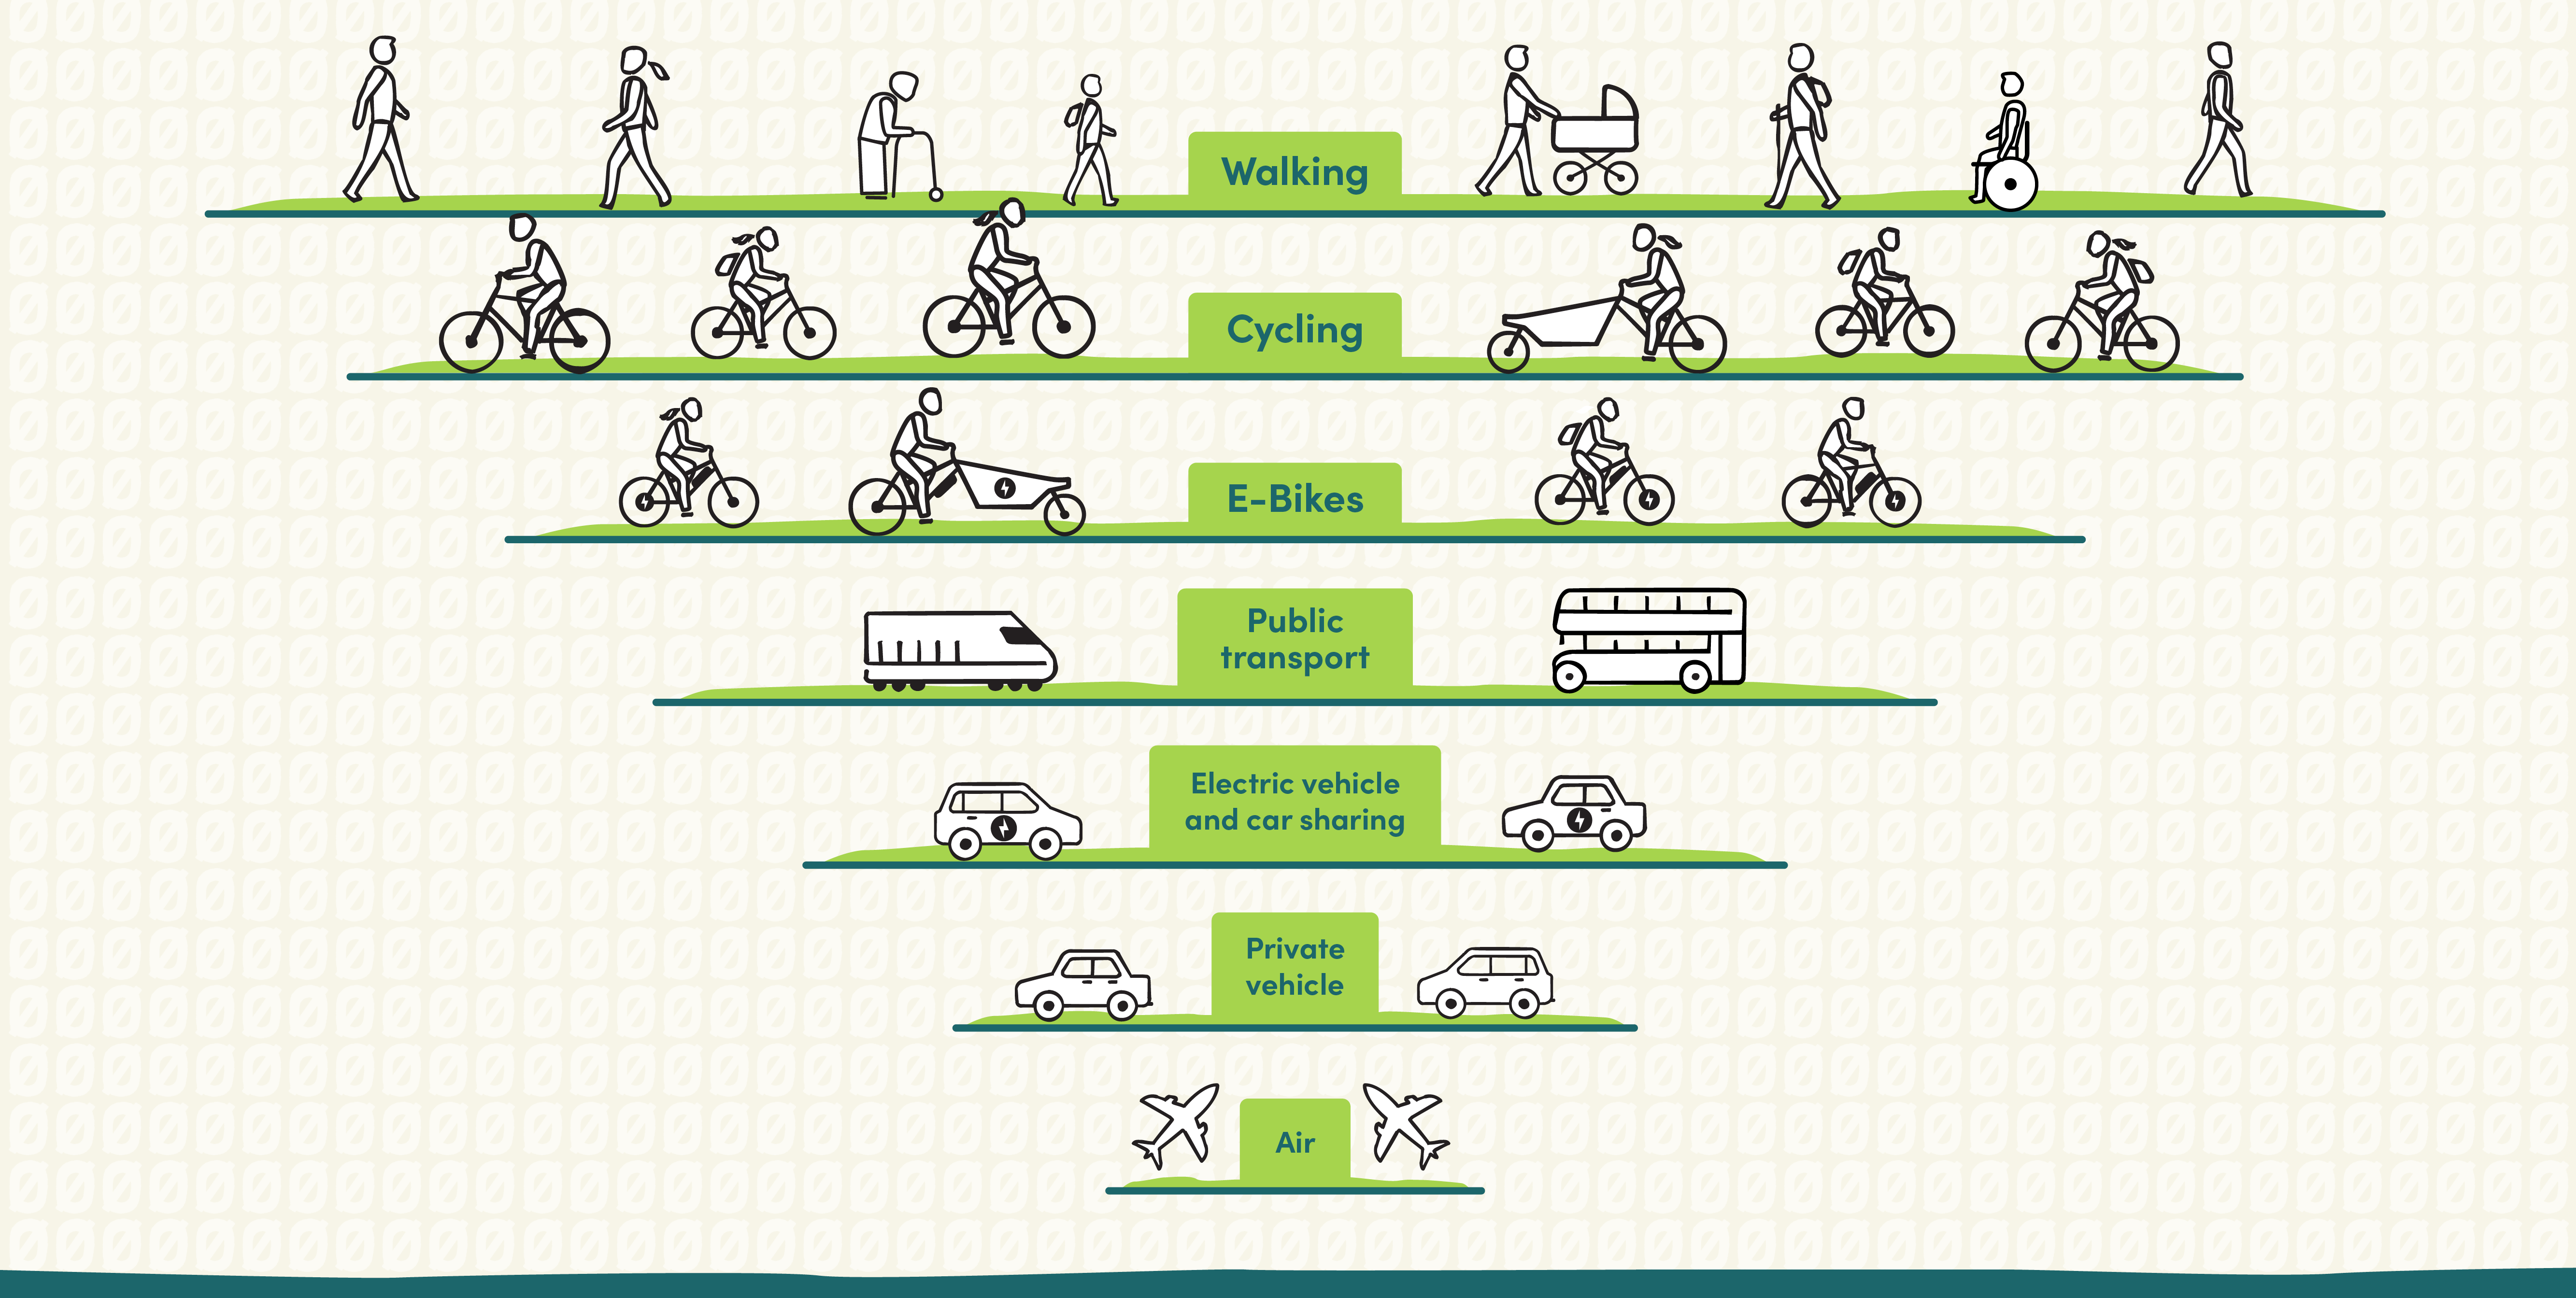 What are my sustainable transport options?